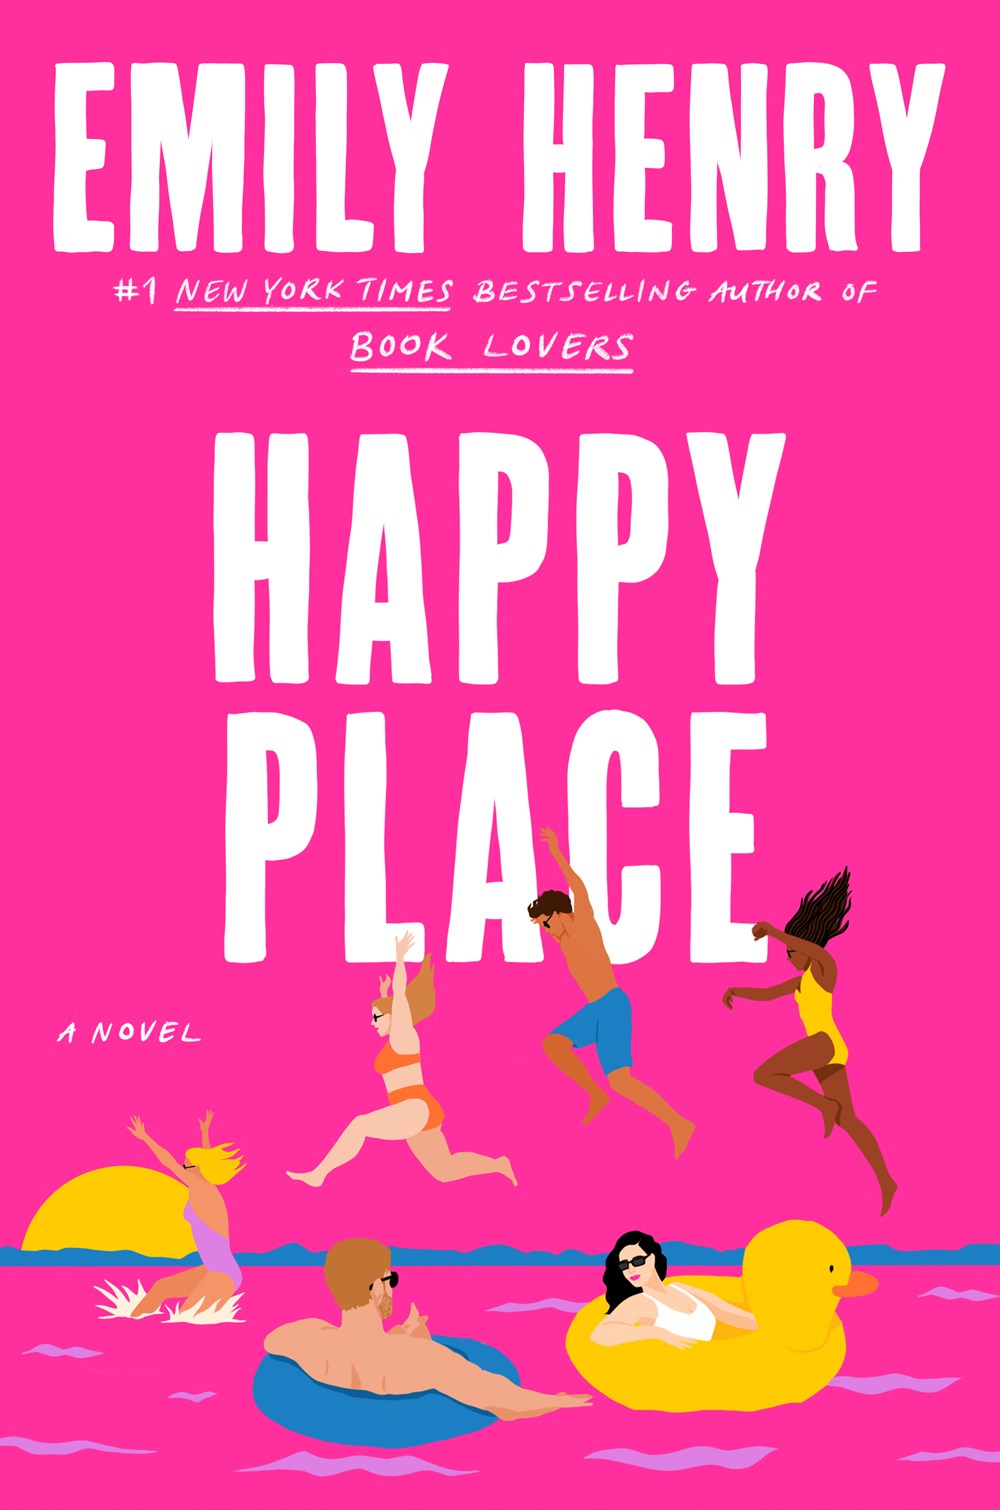 Read-Alikes for ‘Happy Place’ by Emily Henry | LibraryReads